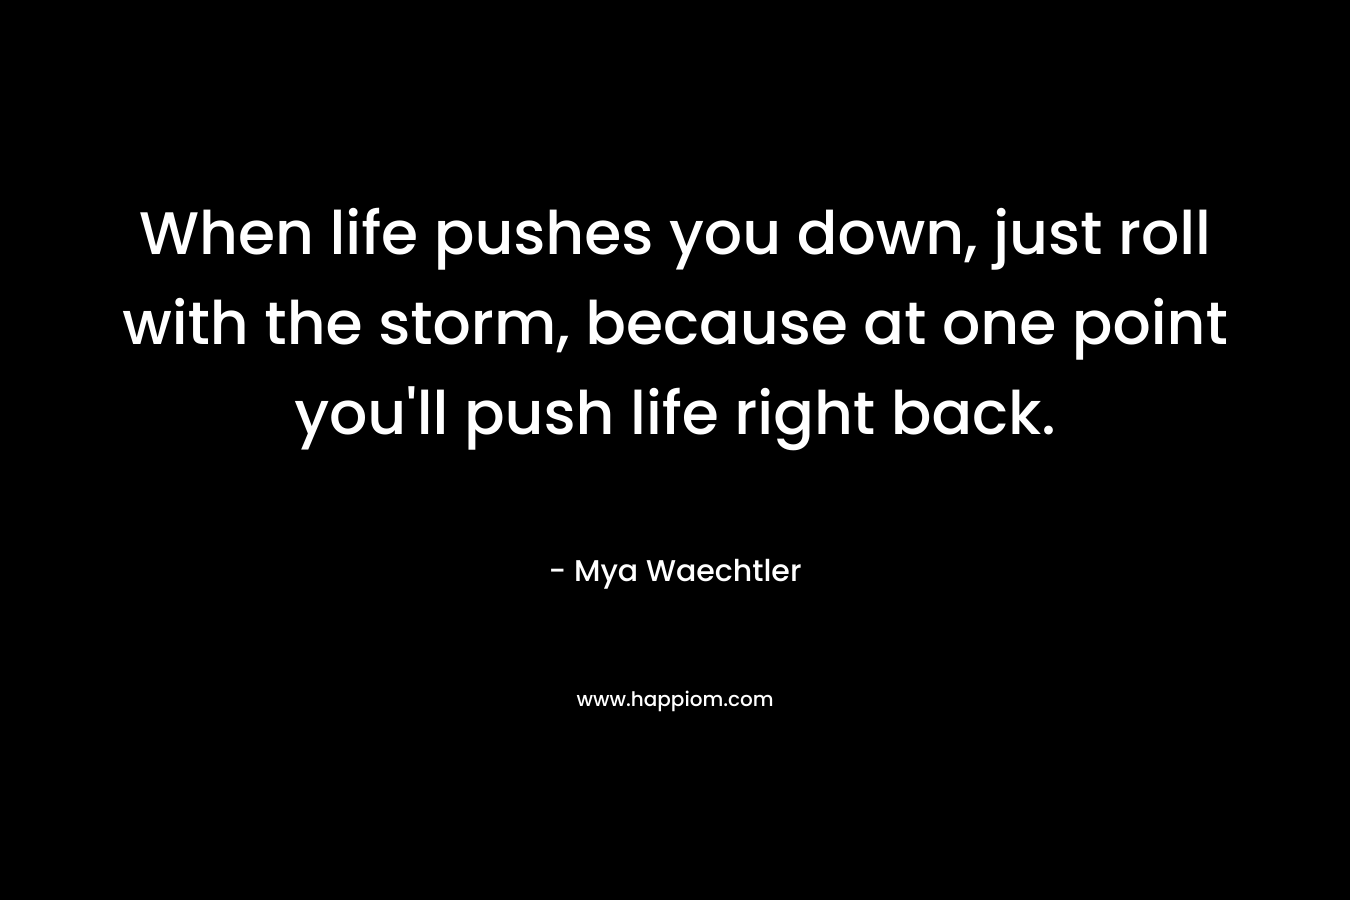 When life pushes you down, just roll with the storm, because at one point you’ll push life right back. – Mya Waechtler